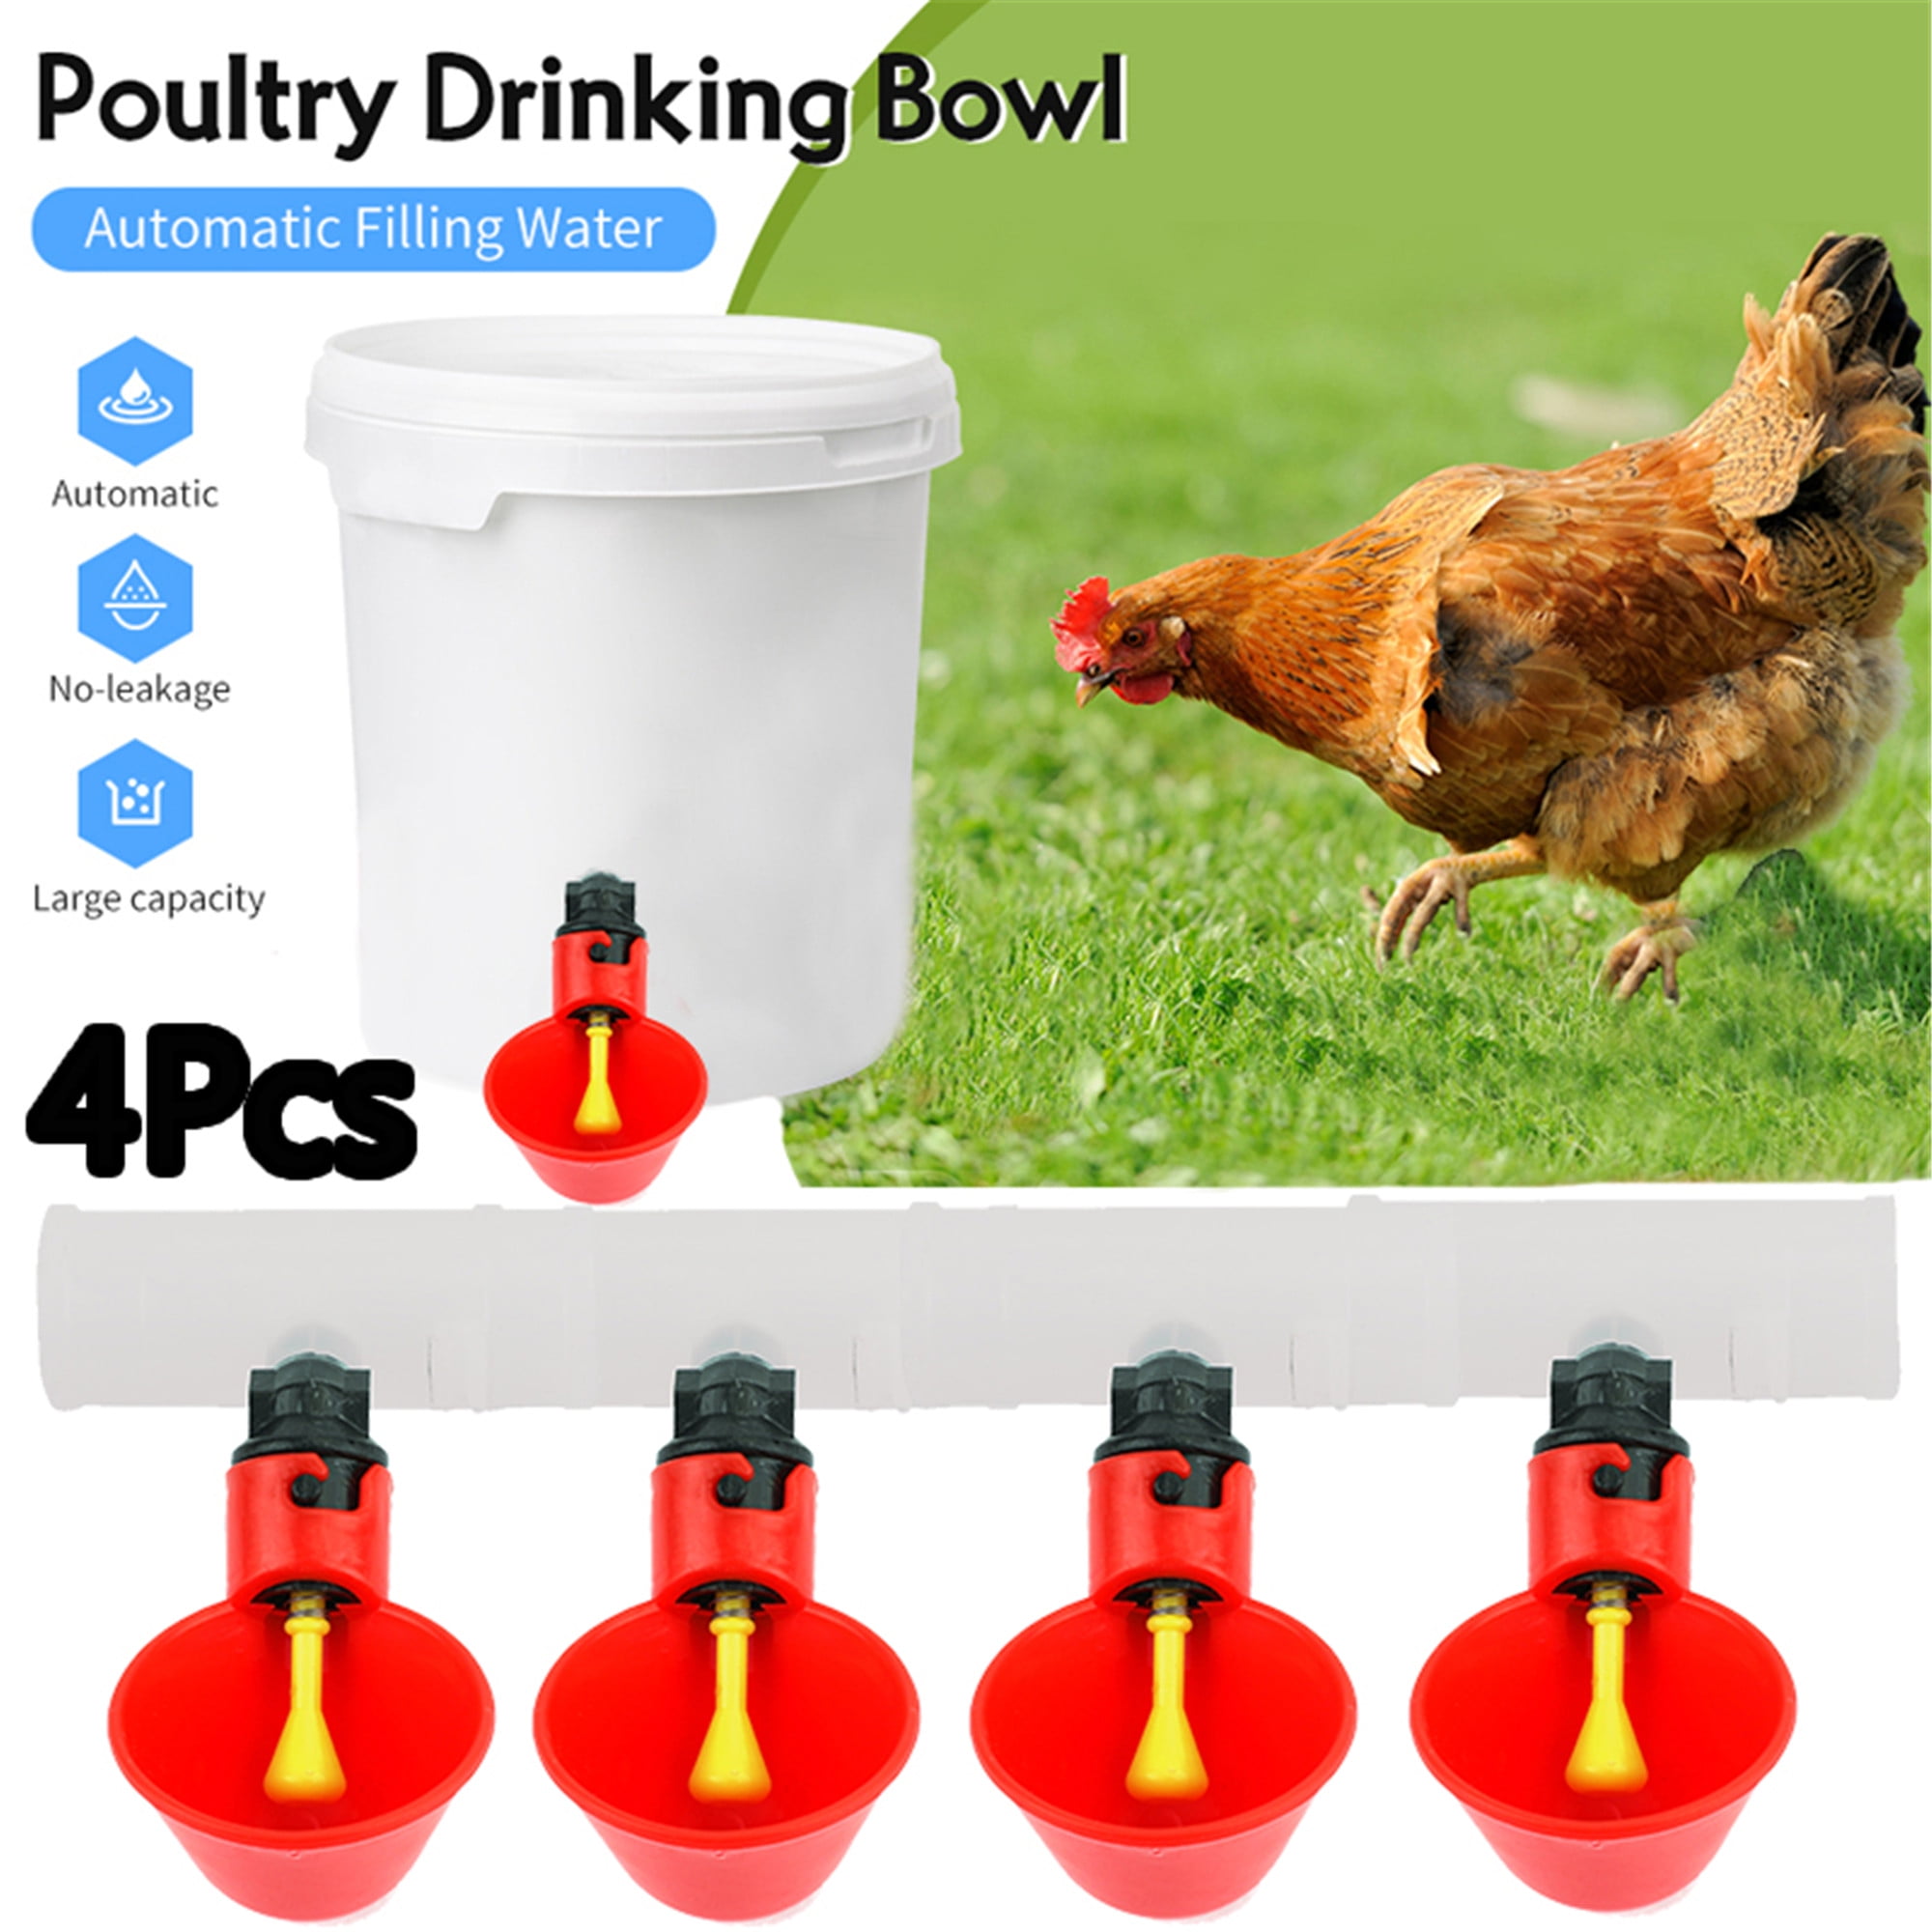 One Poultry Bowl Automatic Plastic Water Drinker Cup for Chicken Drinking System 